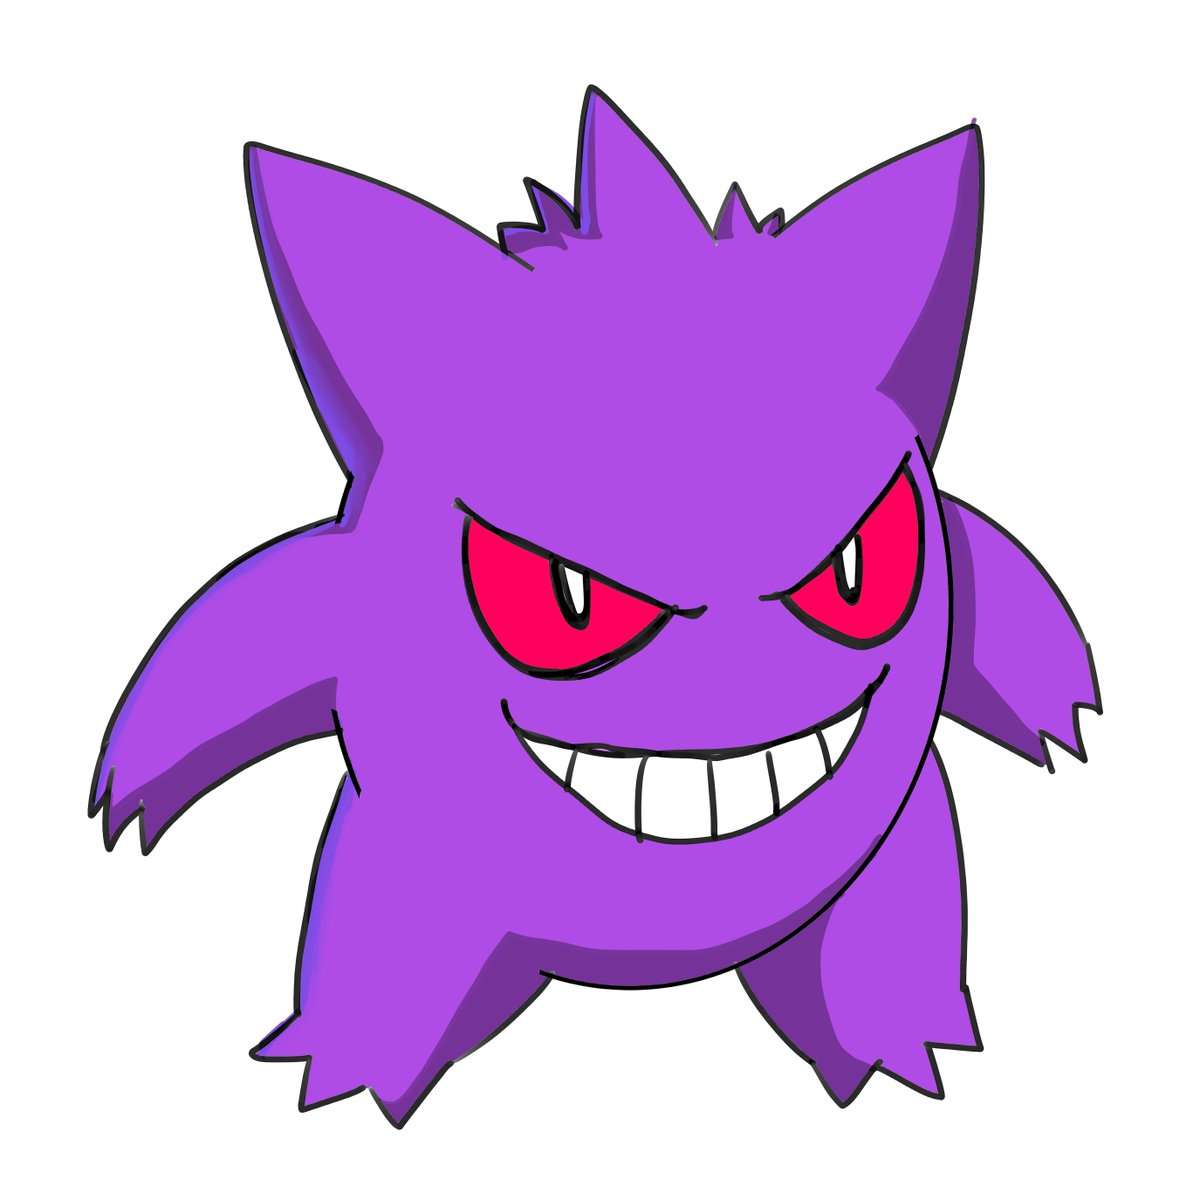 #Inktober20222 #Drawtober2022 #Pokemon #Gengar

Drawtober 2022 #5: Gengar/ゲンガー

So far, every year; I draw at least one pokemon. So, I thought - why not Gengar? Also, because its one of the easiest pokemon one can draw! XD